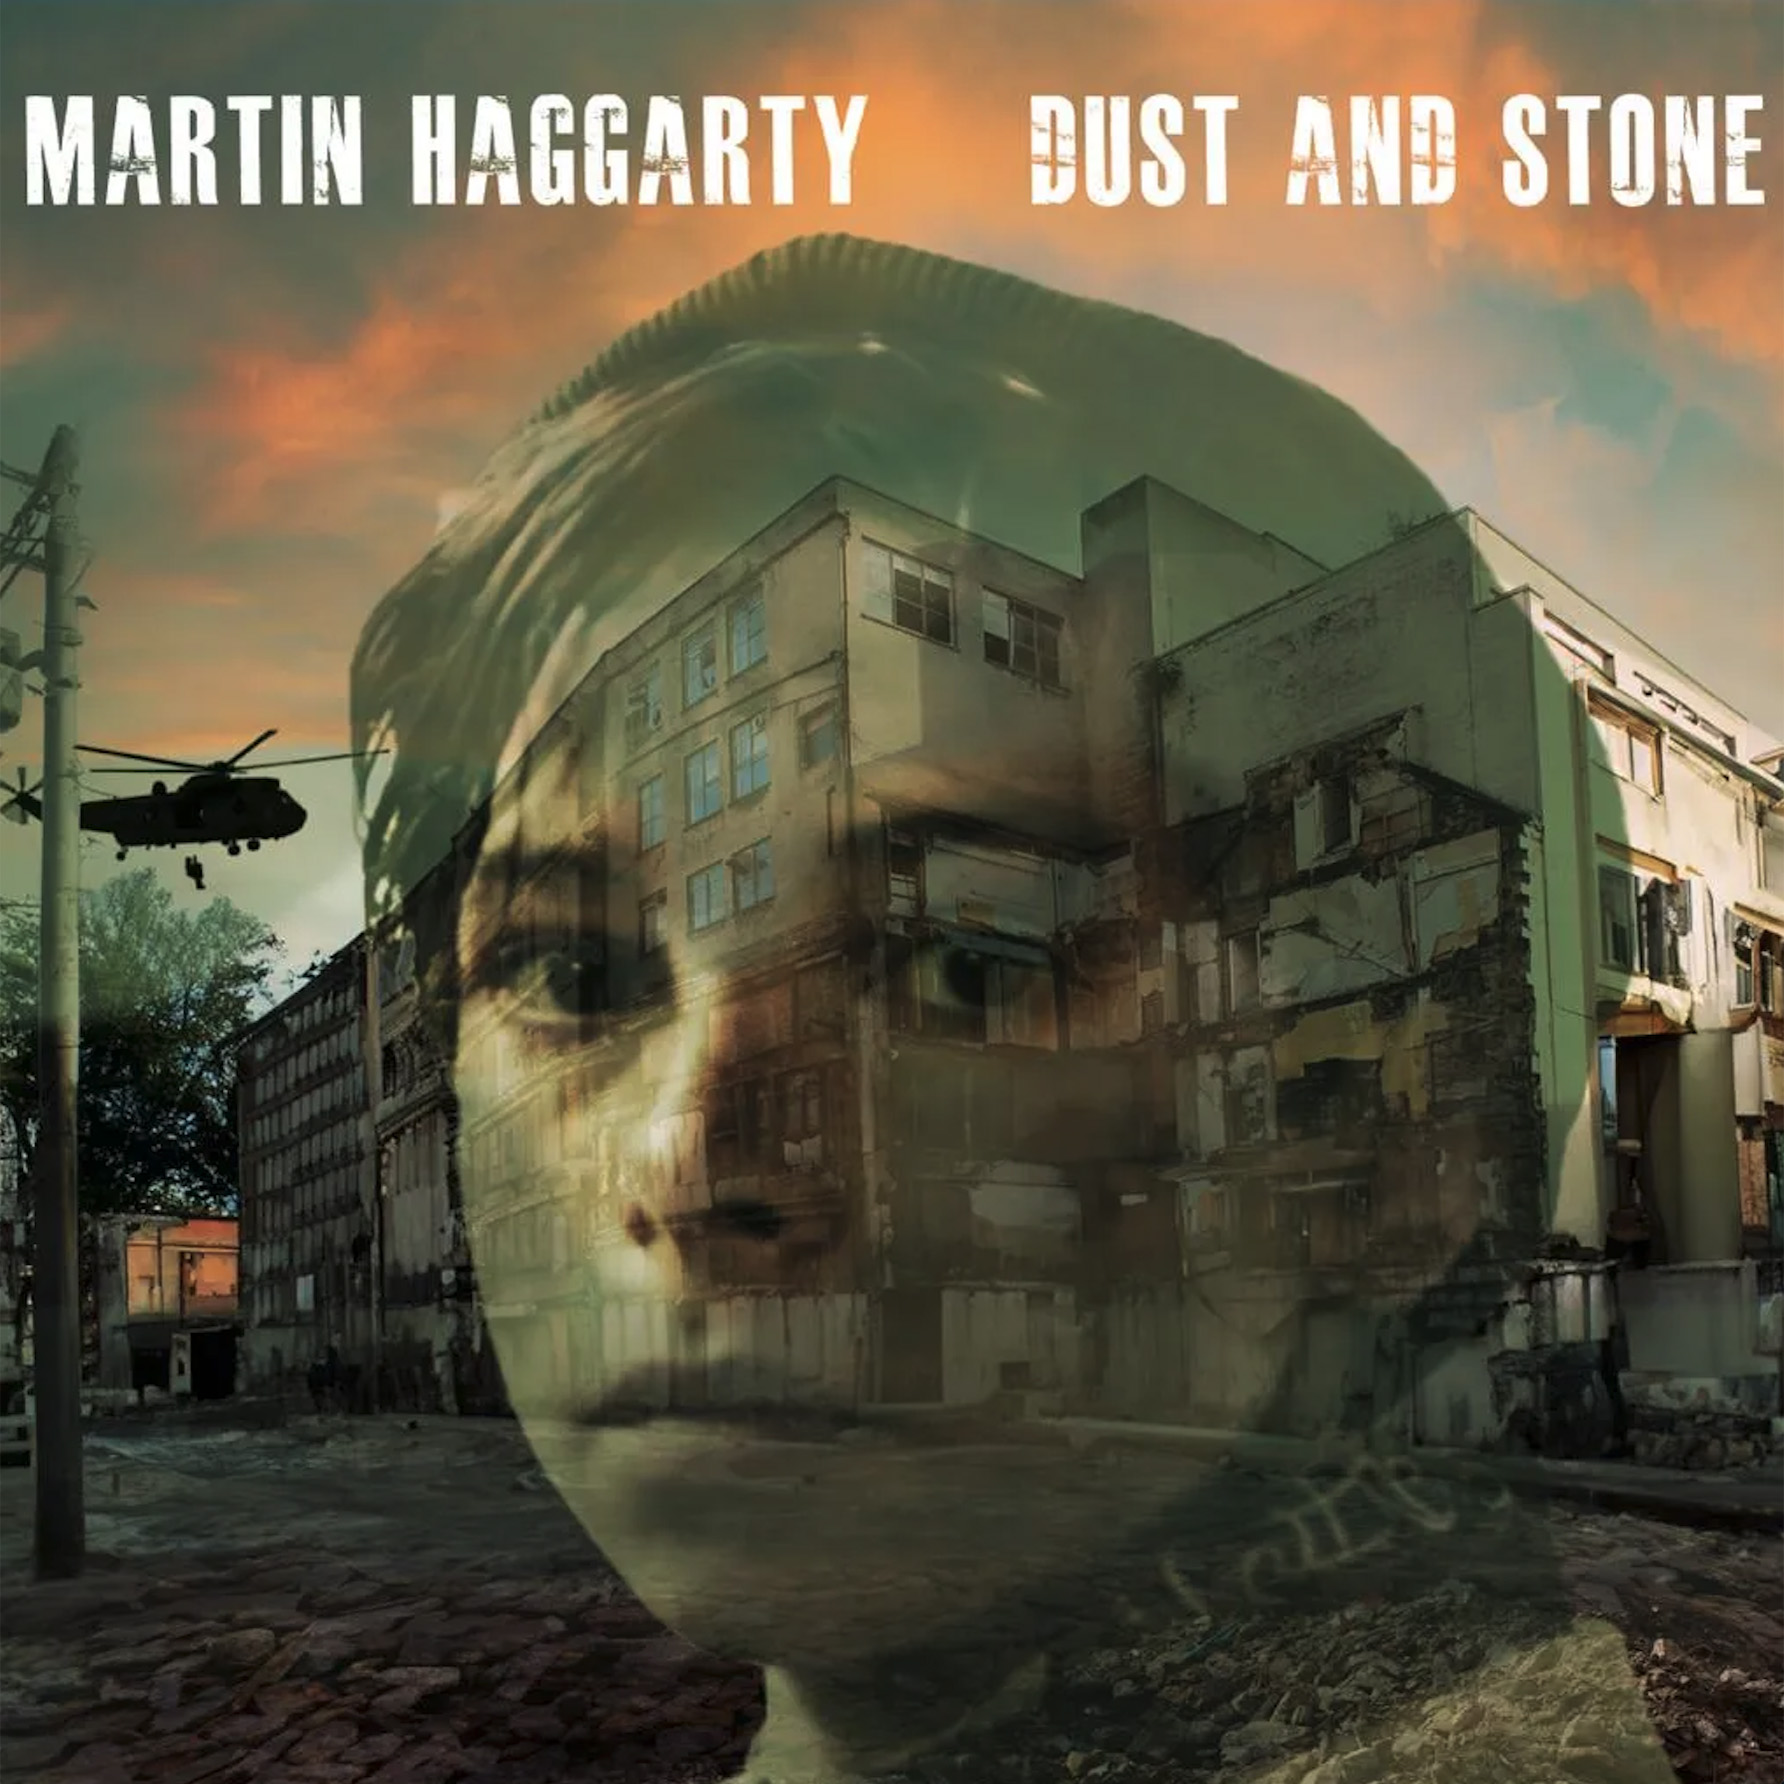 Dust and Stone by Martin Haggarty